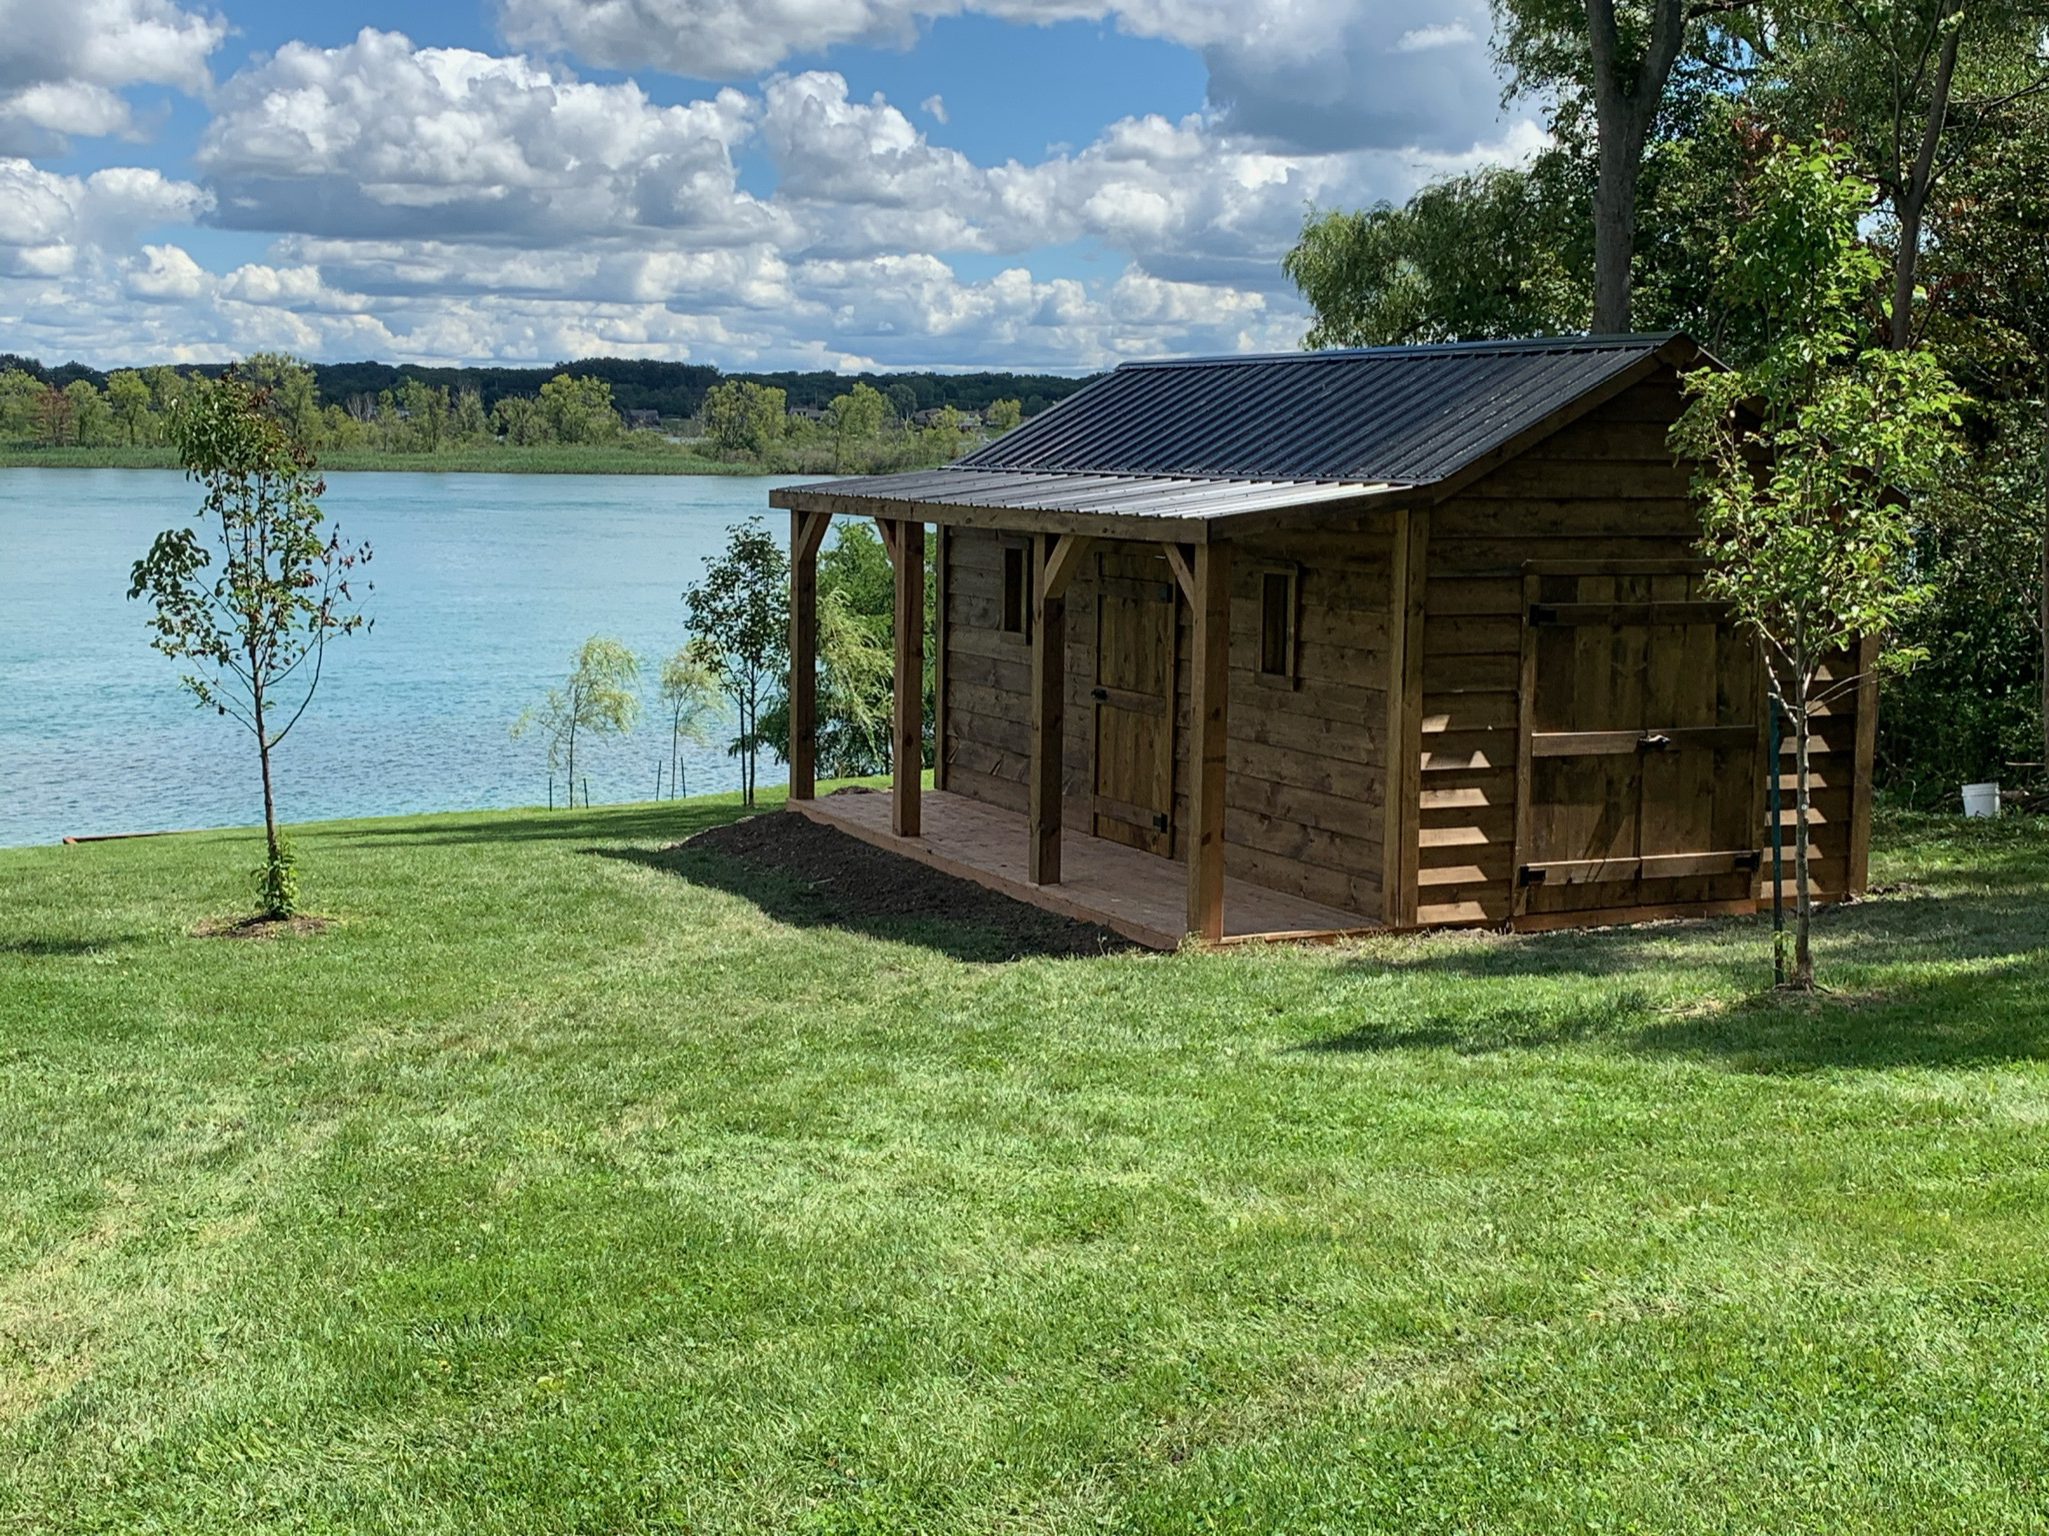 Wood cabin on lake front